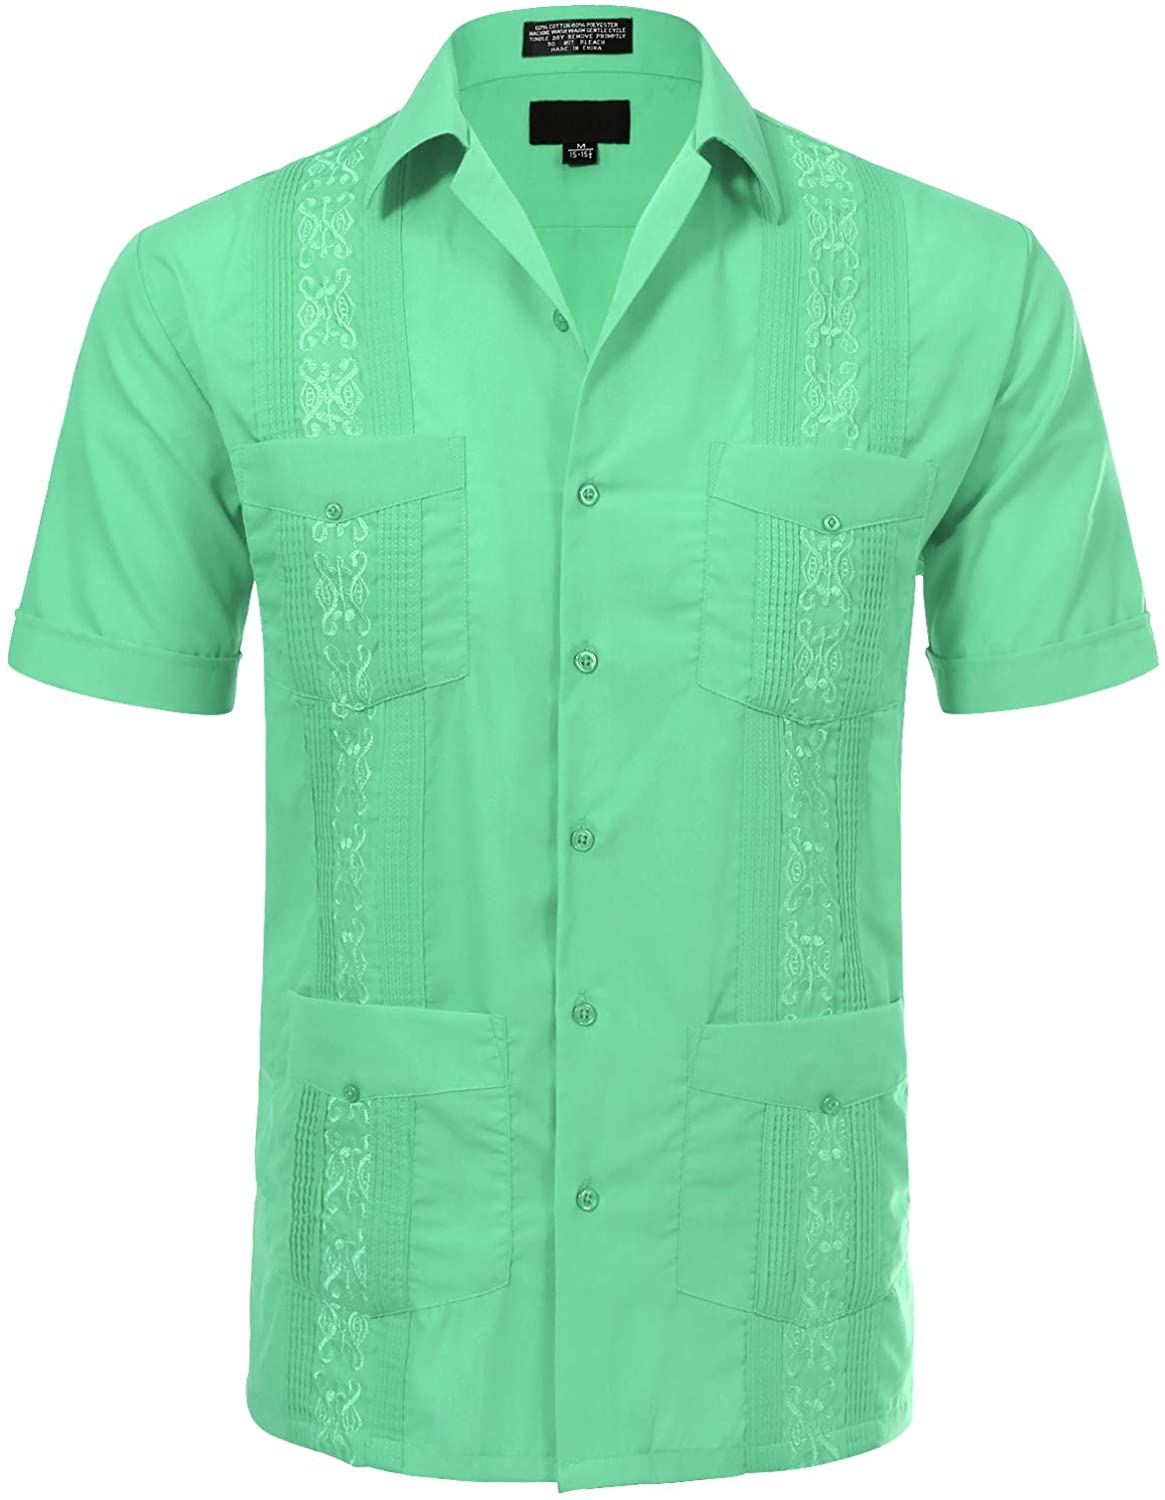 Brand New Men's Guayabera NWT Cuban Dress Shirts in Multiple Colors and Sizes 